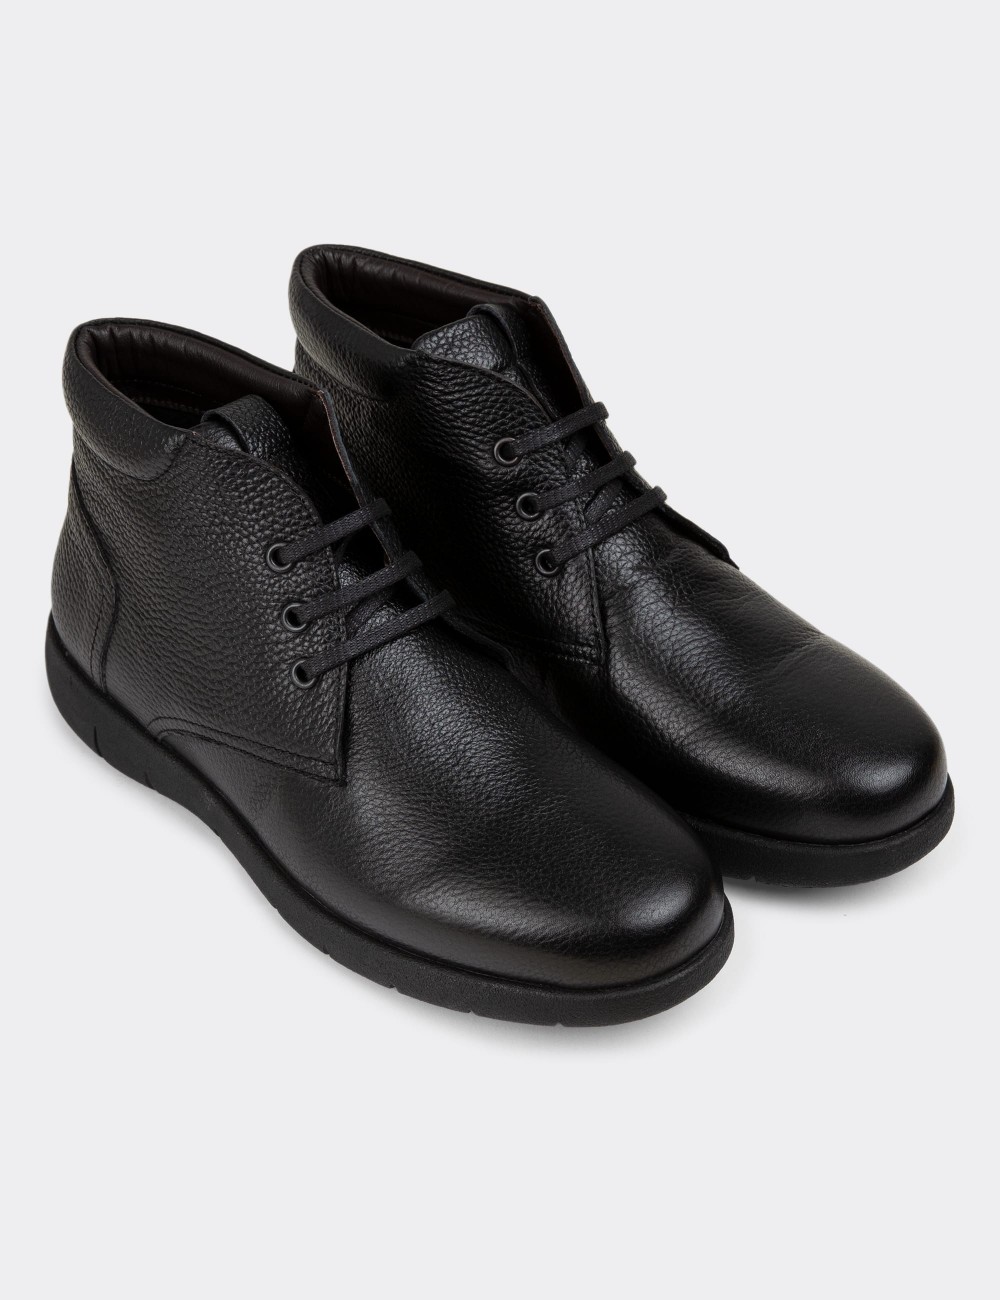 Black Leather Boots - 01948MSYHC01